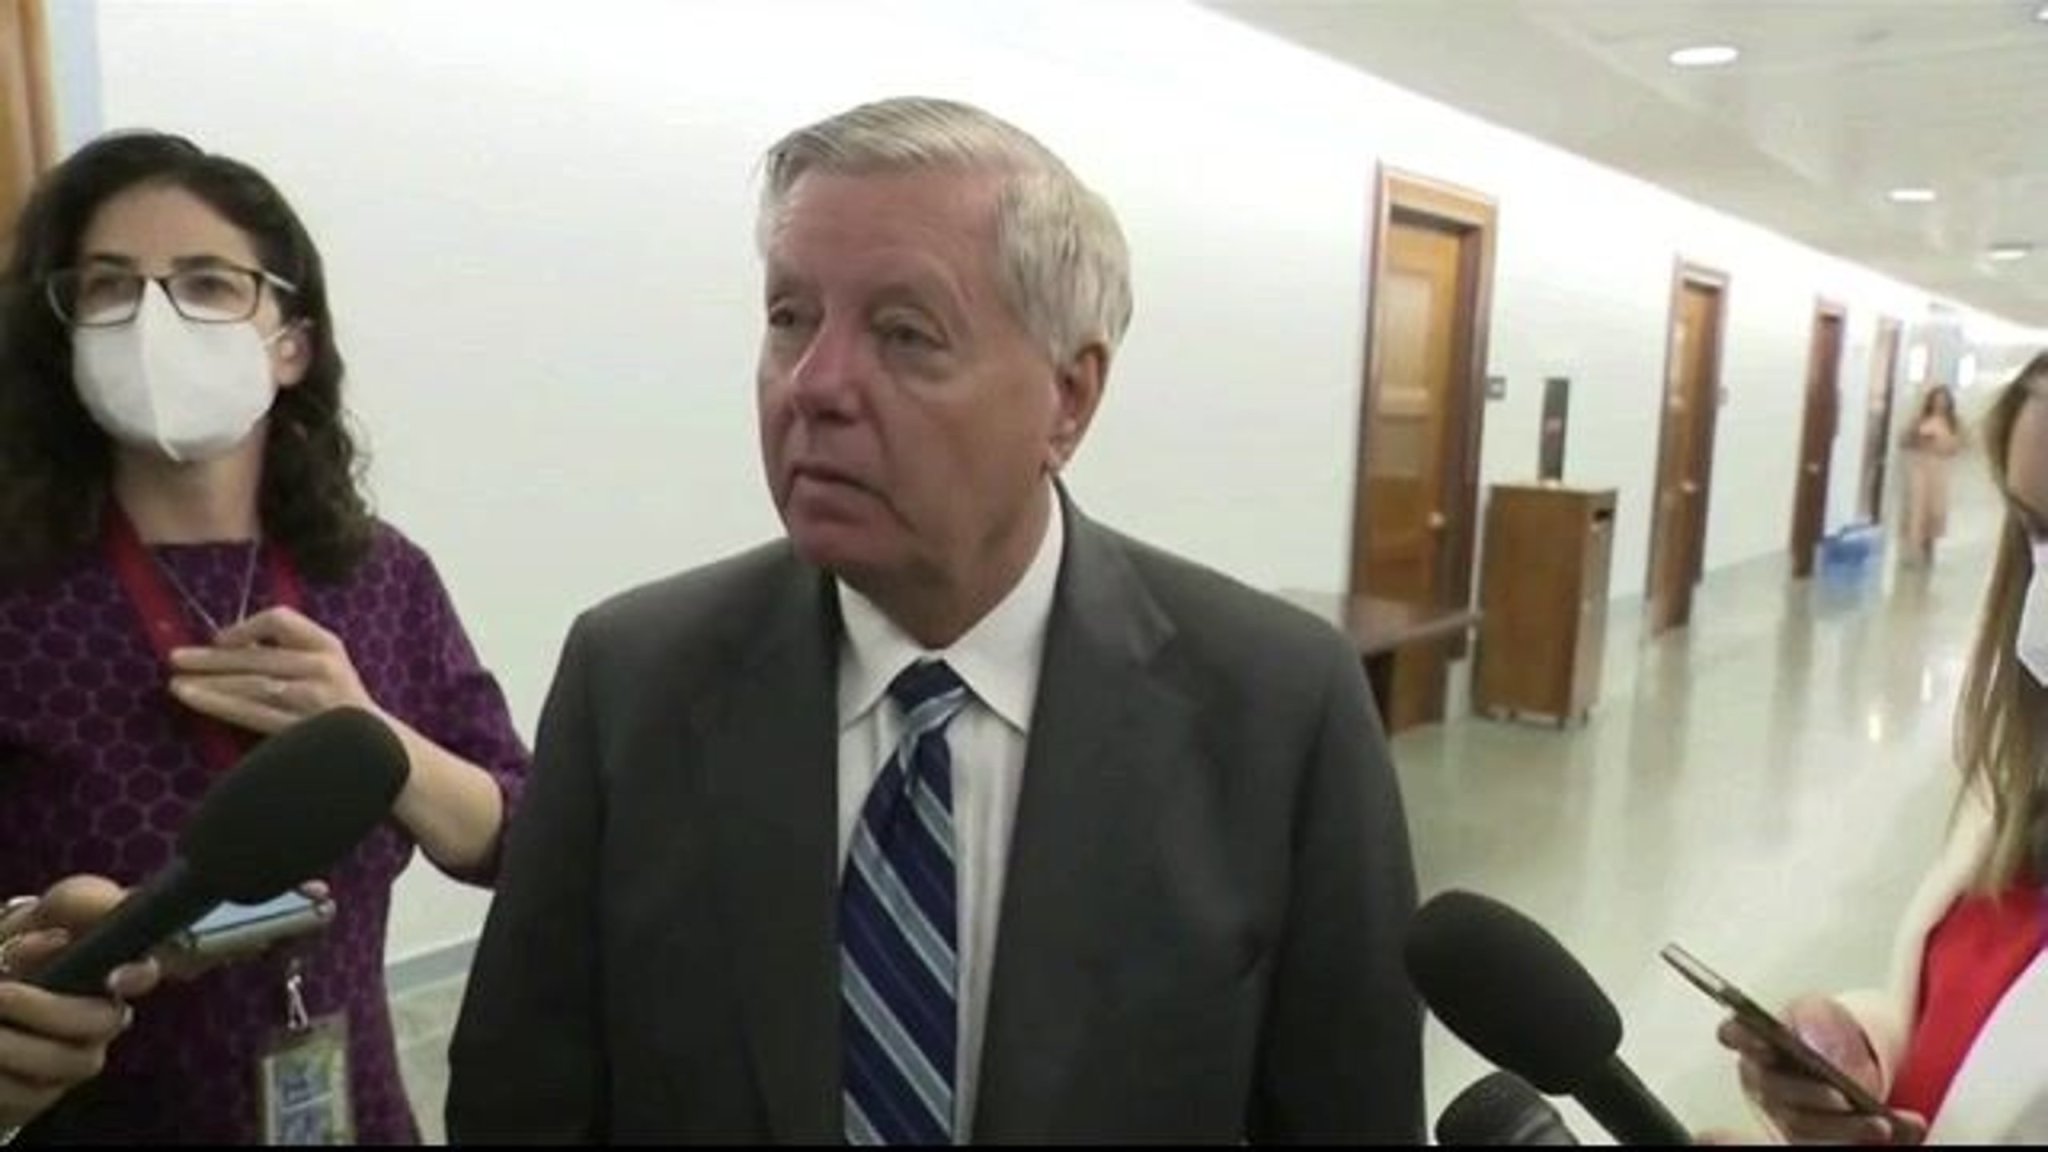 Sen. Graham (R-SC) defends SCOTUS justices lying about intention to overturn Roe v. Wade during confirmation hearings.